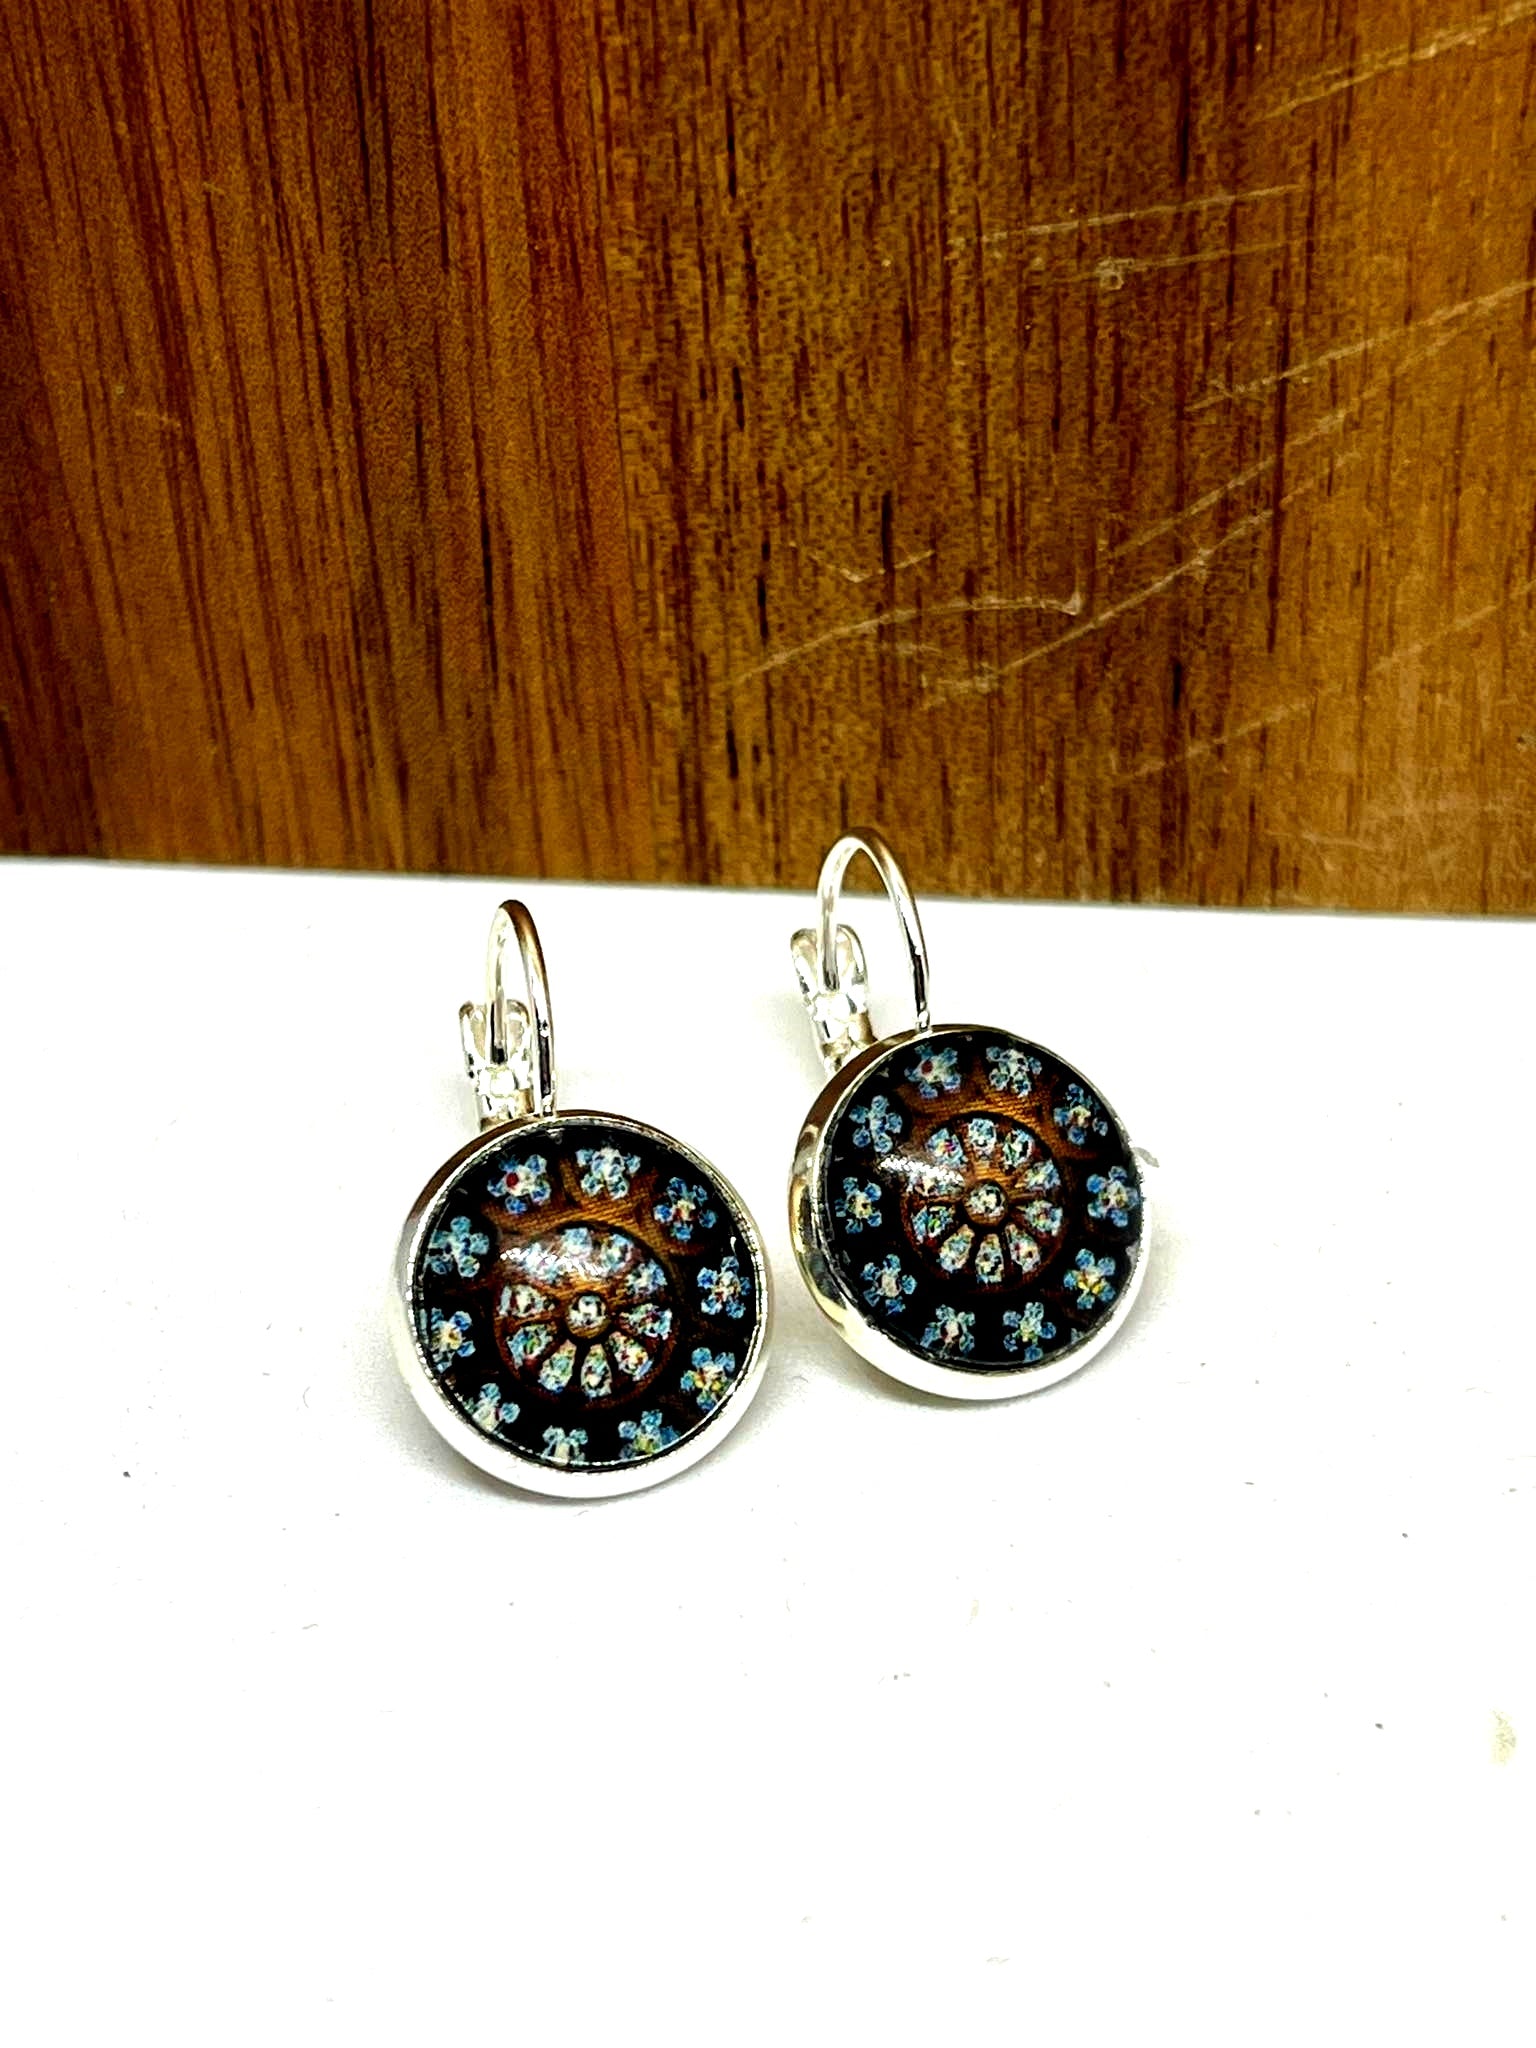 Christchurch cathedral rose window glass dome earrings 